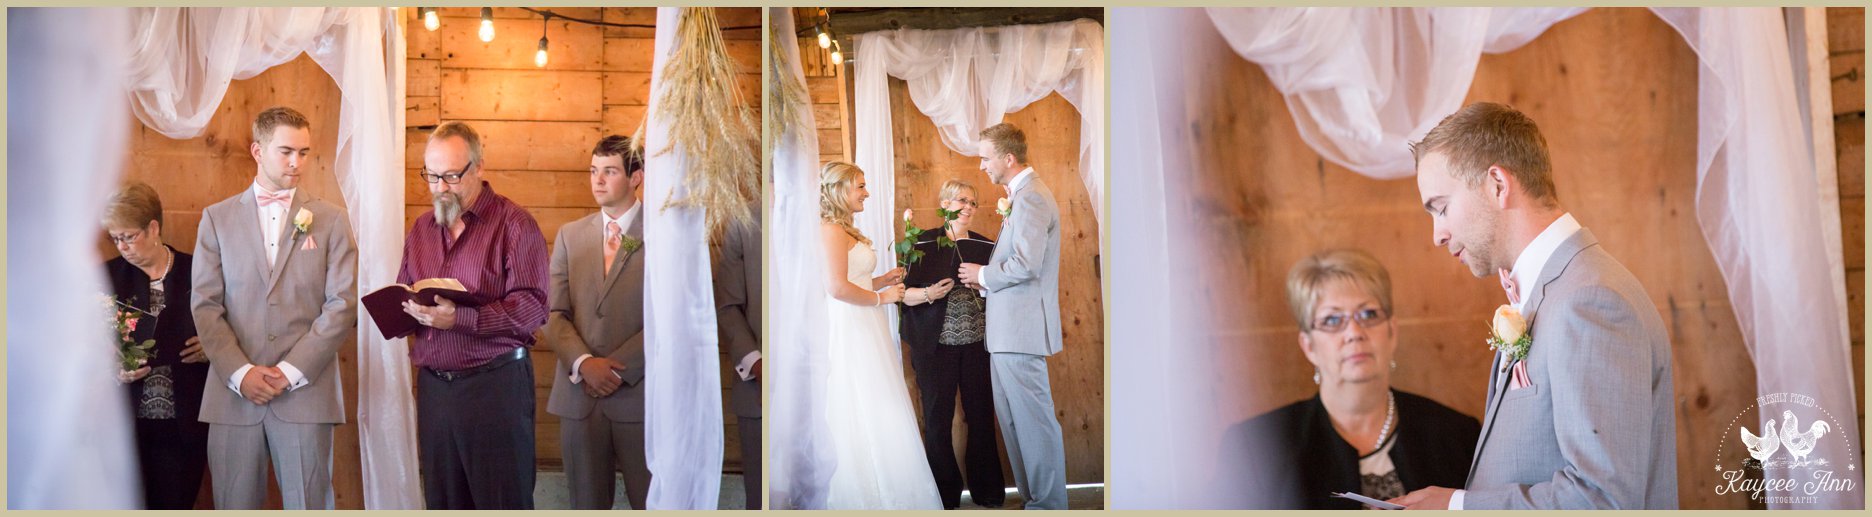 barn, wedding, saying vows, saying i do, marry, tulle, diy, rustic, country